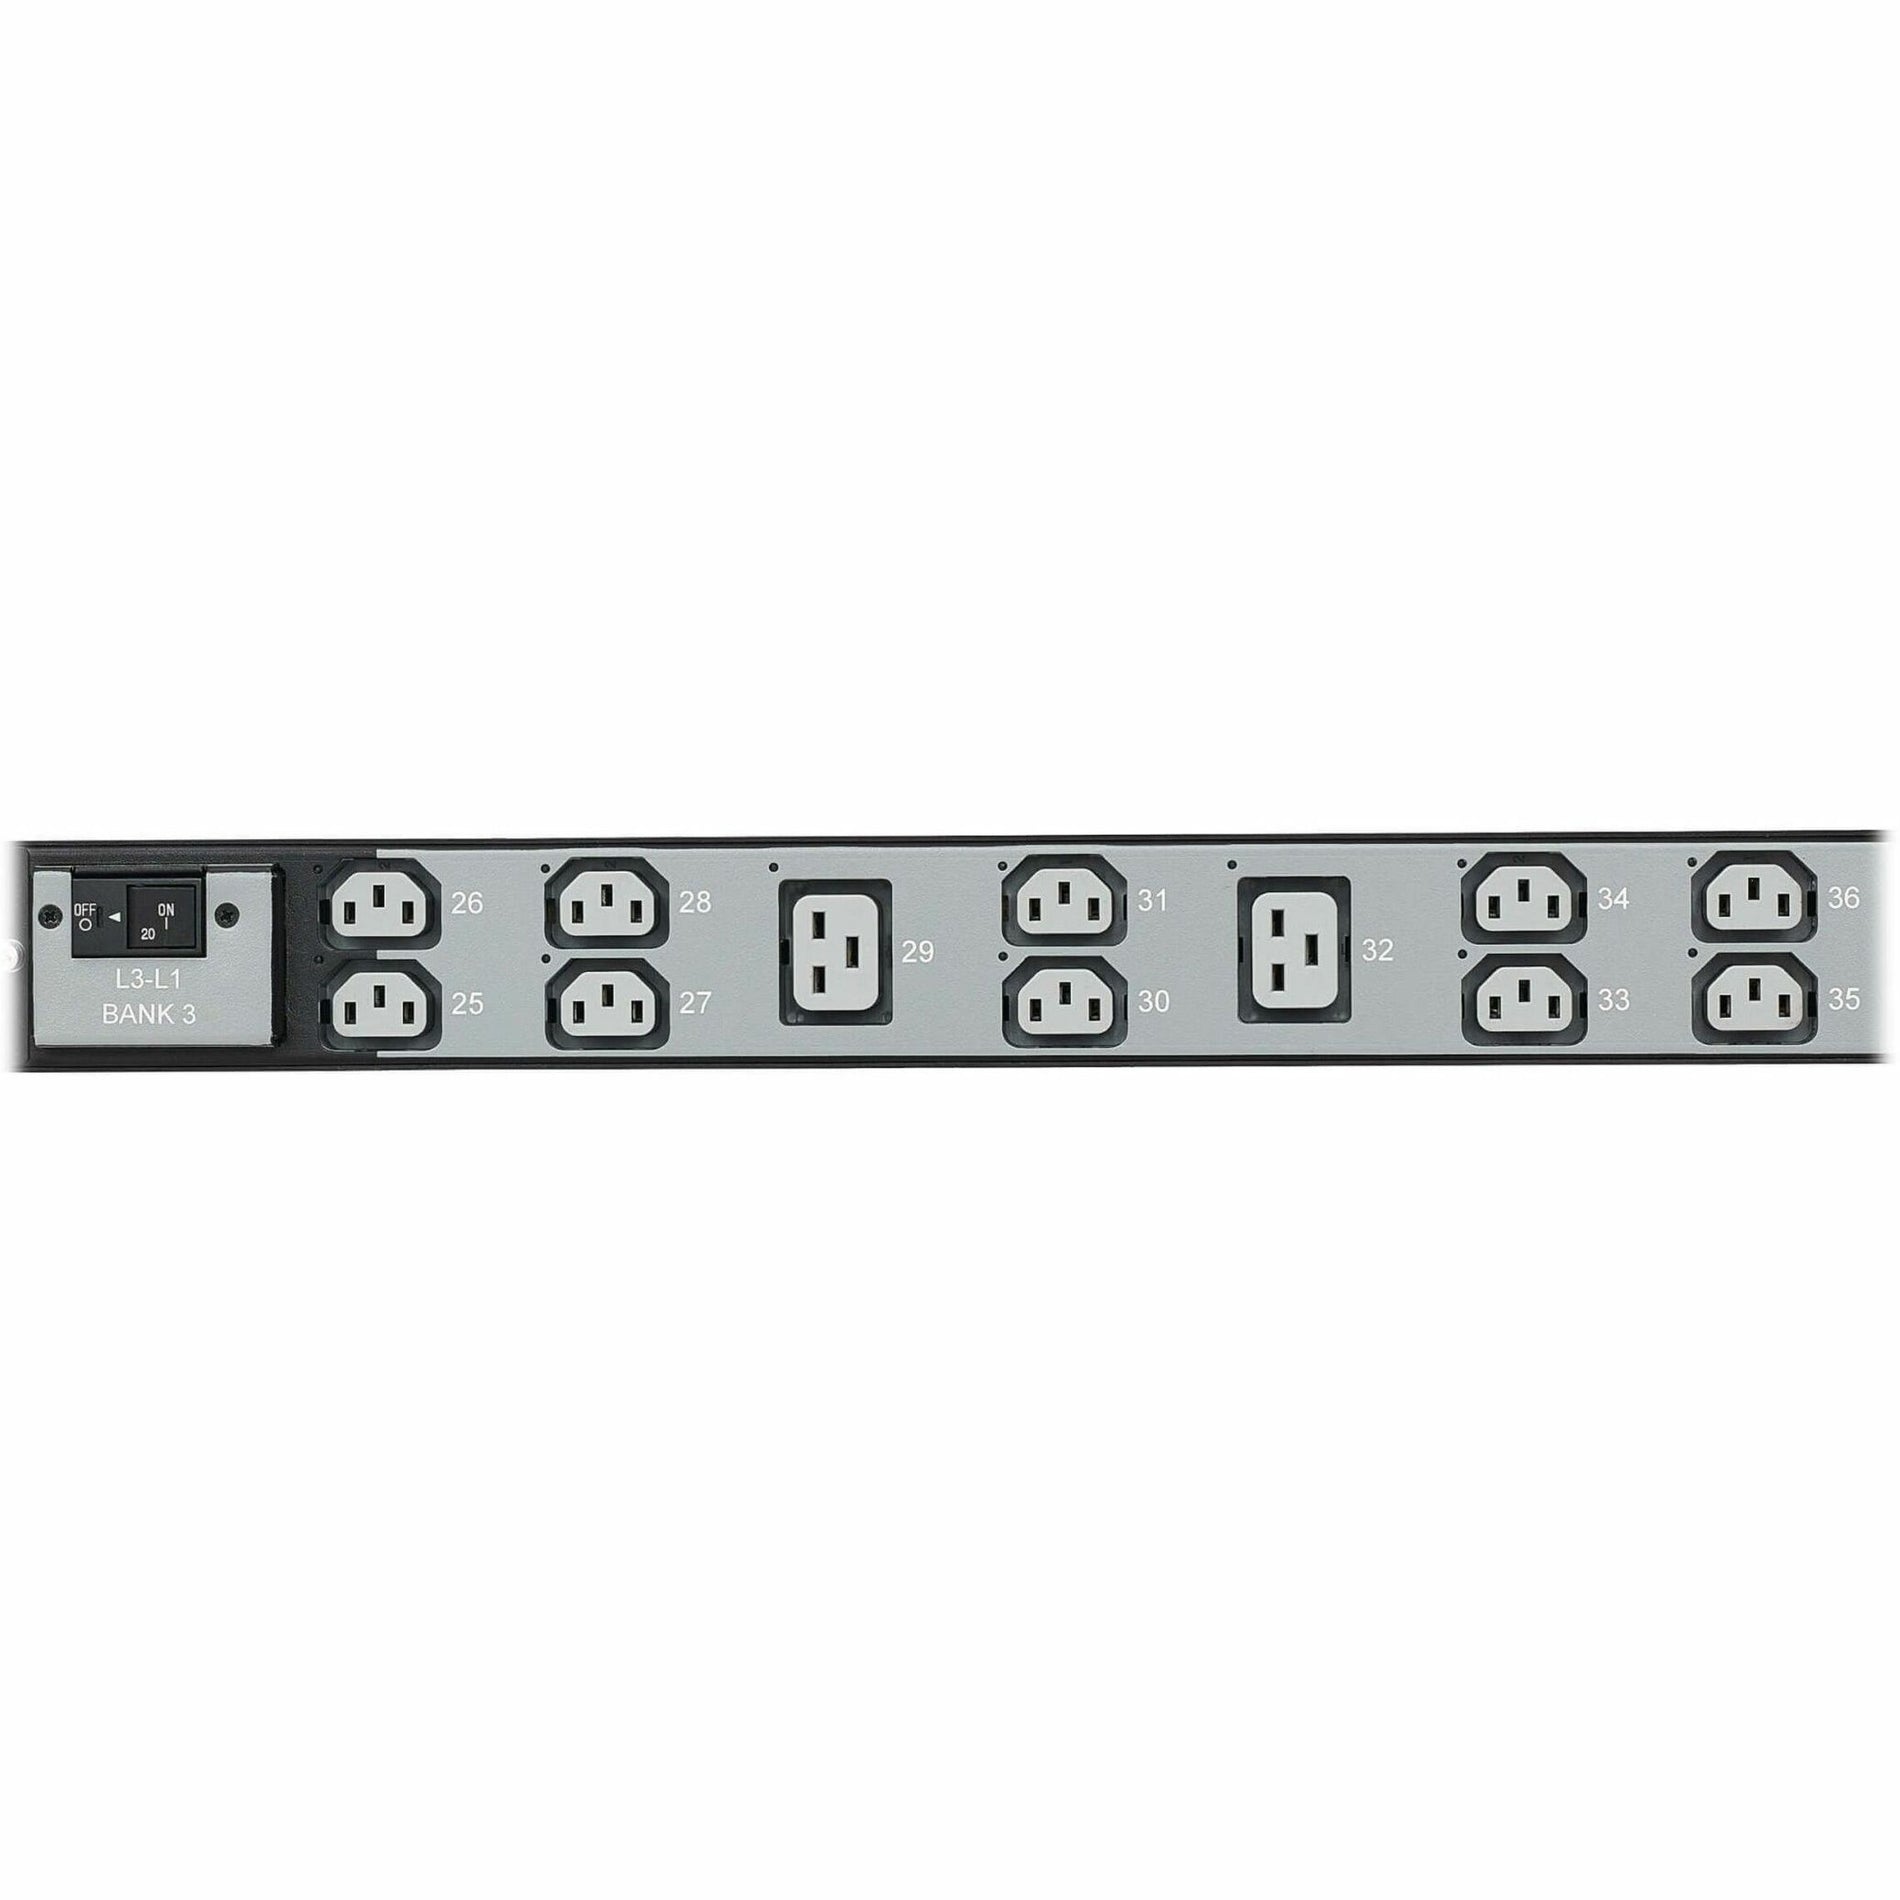 Tripp Lite PDU3EVSR1G60 36-Outlets PDU 12.60 kW Power Rating Managed Switched Overload Protection